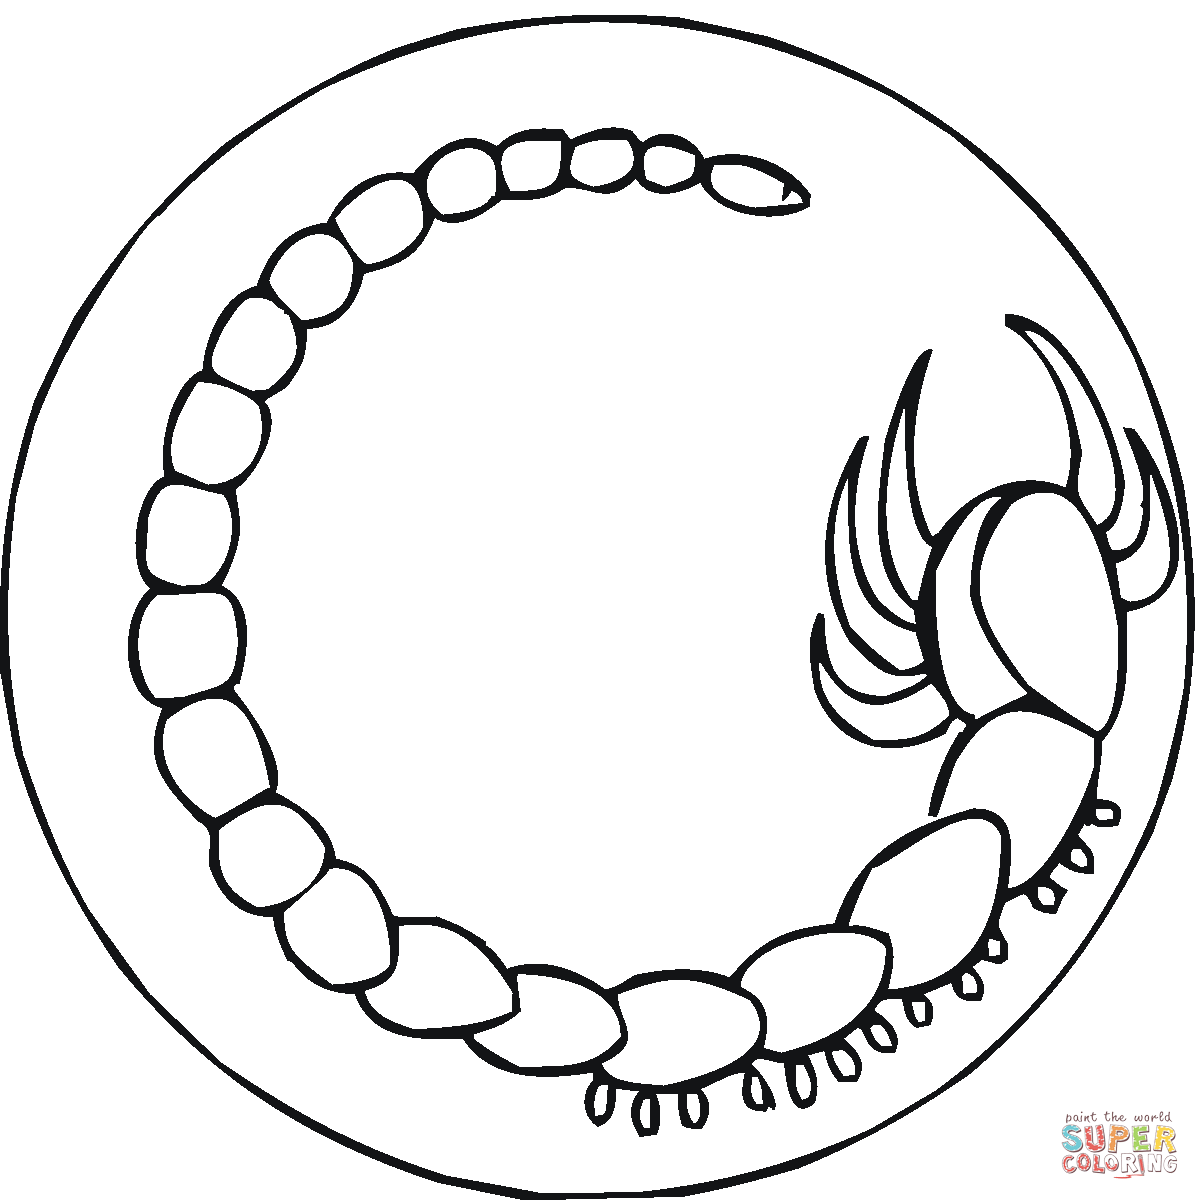 Scorpion 4 coloring page | Free Printable Coloring Pages